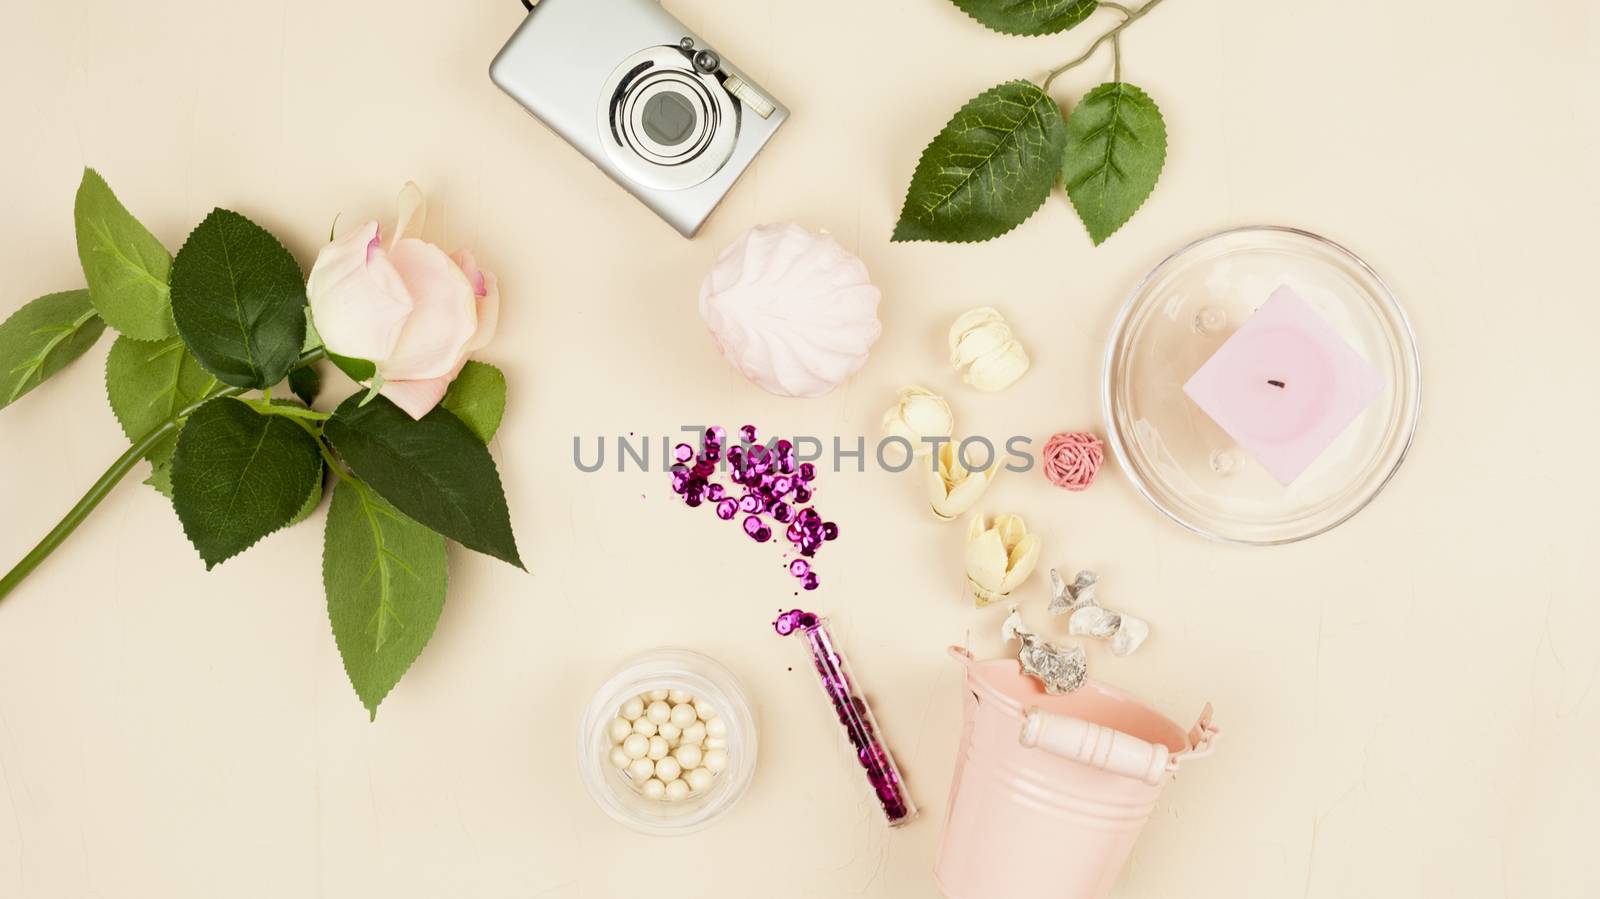 Decorative pail, paint, dried flowers, glitter, camera, roses on a light background. Still life.